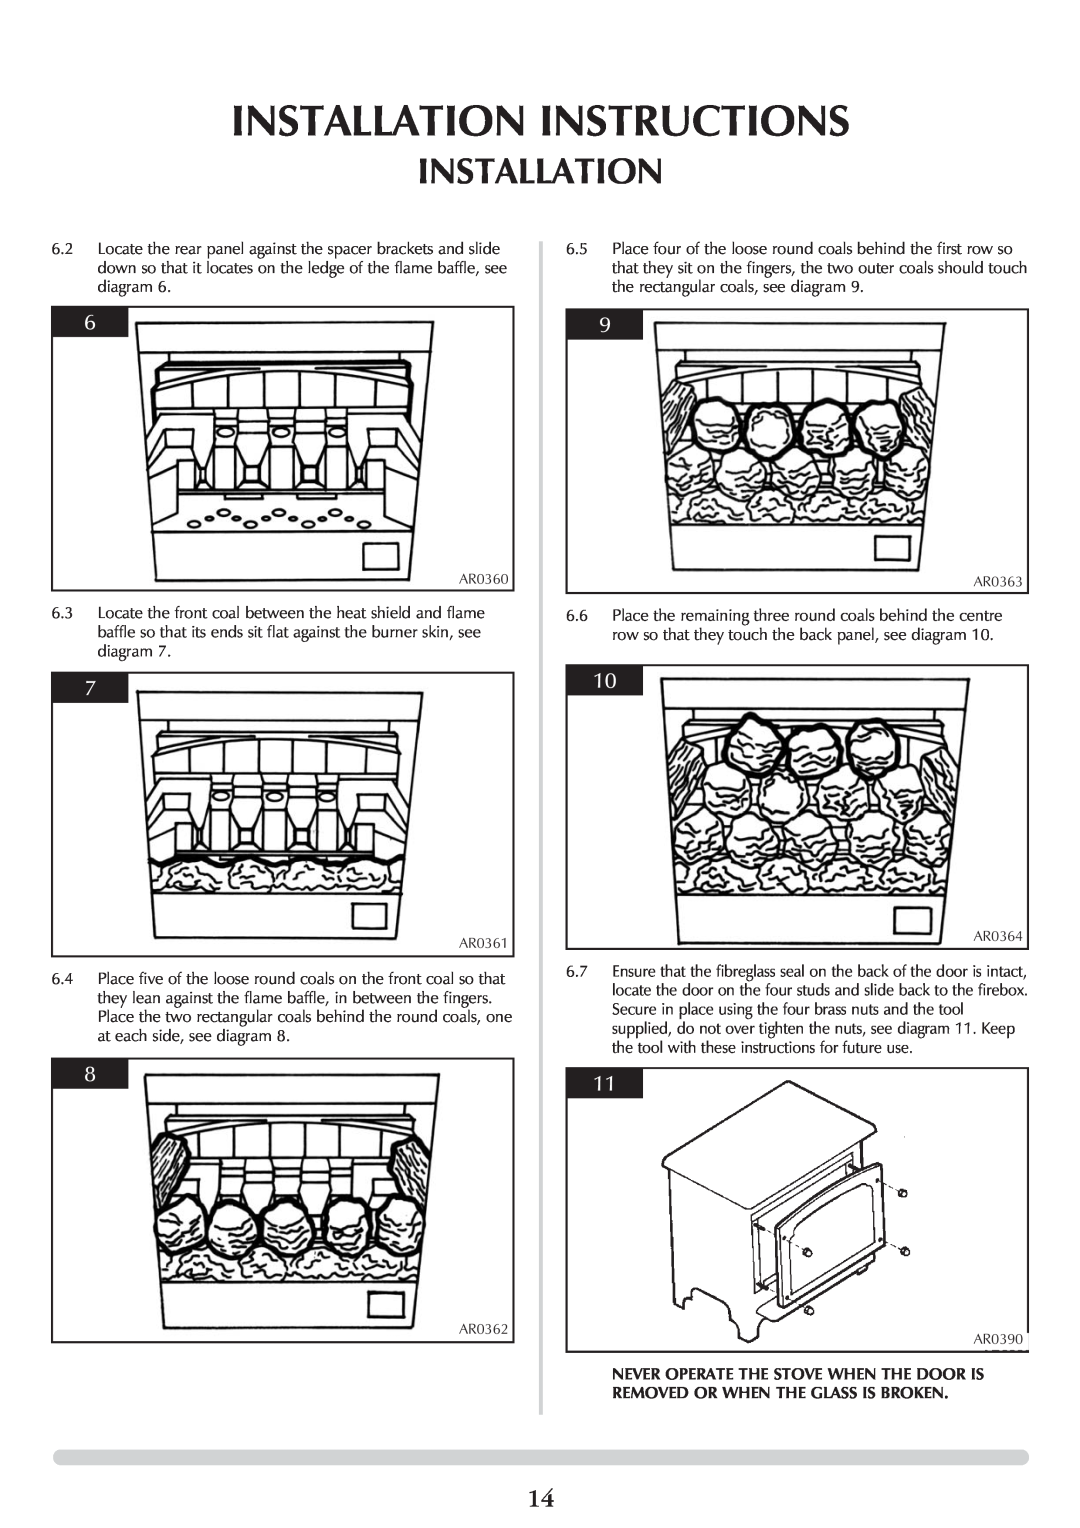 Stovax P8568 Installation Instructions, Never Operate The Stove When The Door Is, Removed Or When The Glass Is Broken 